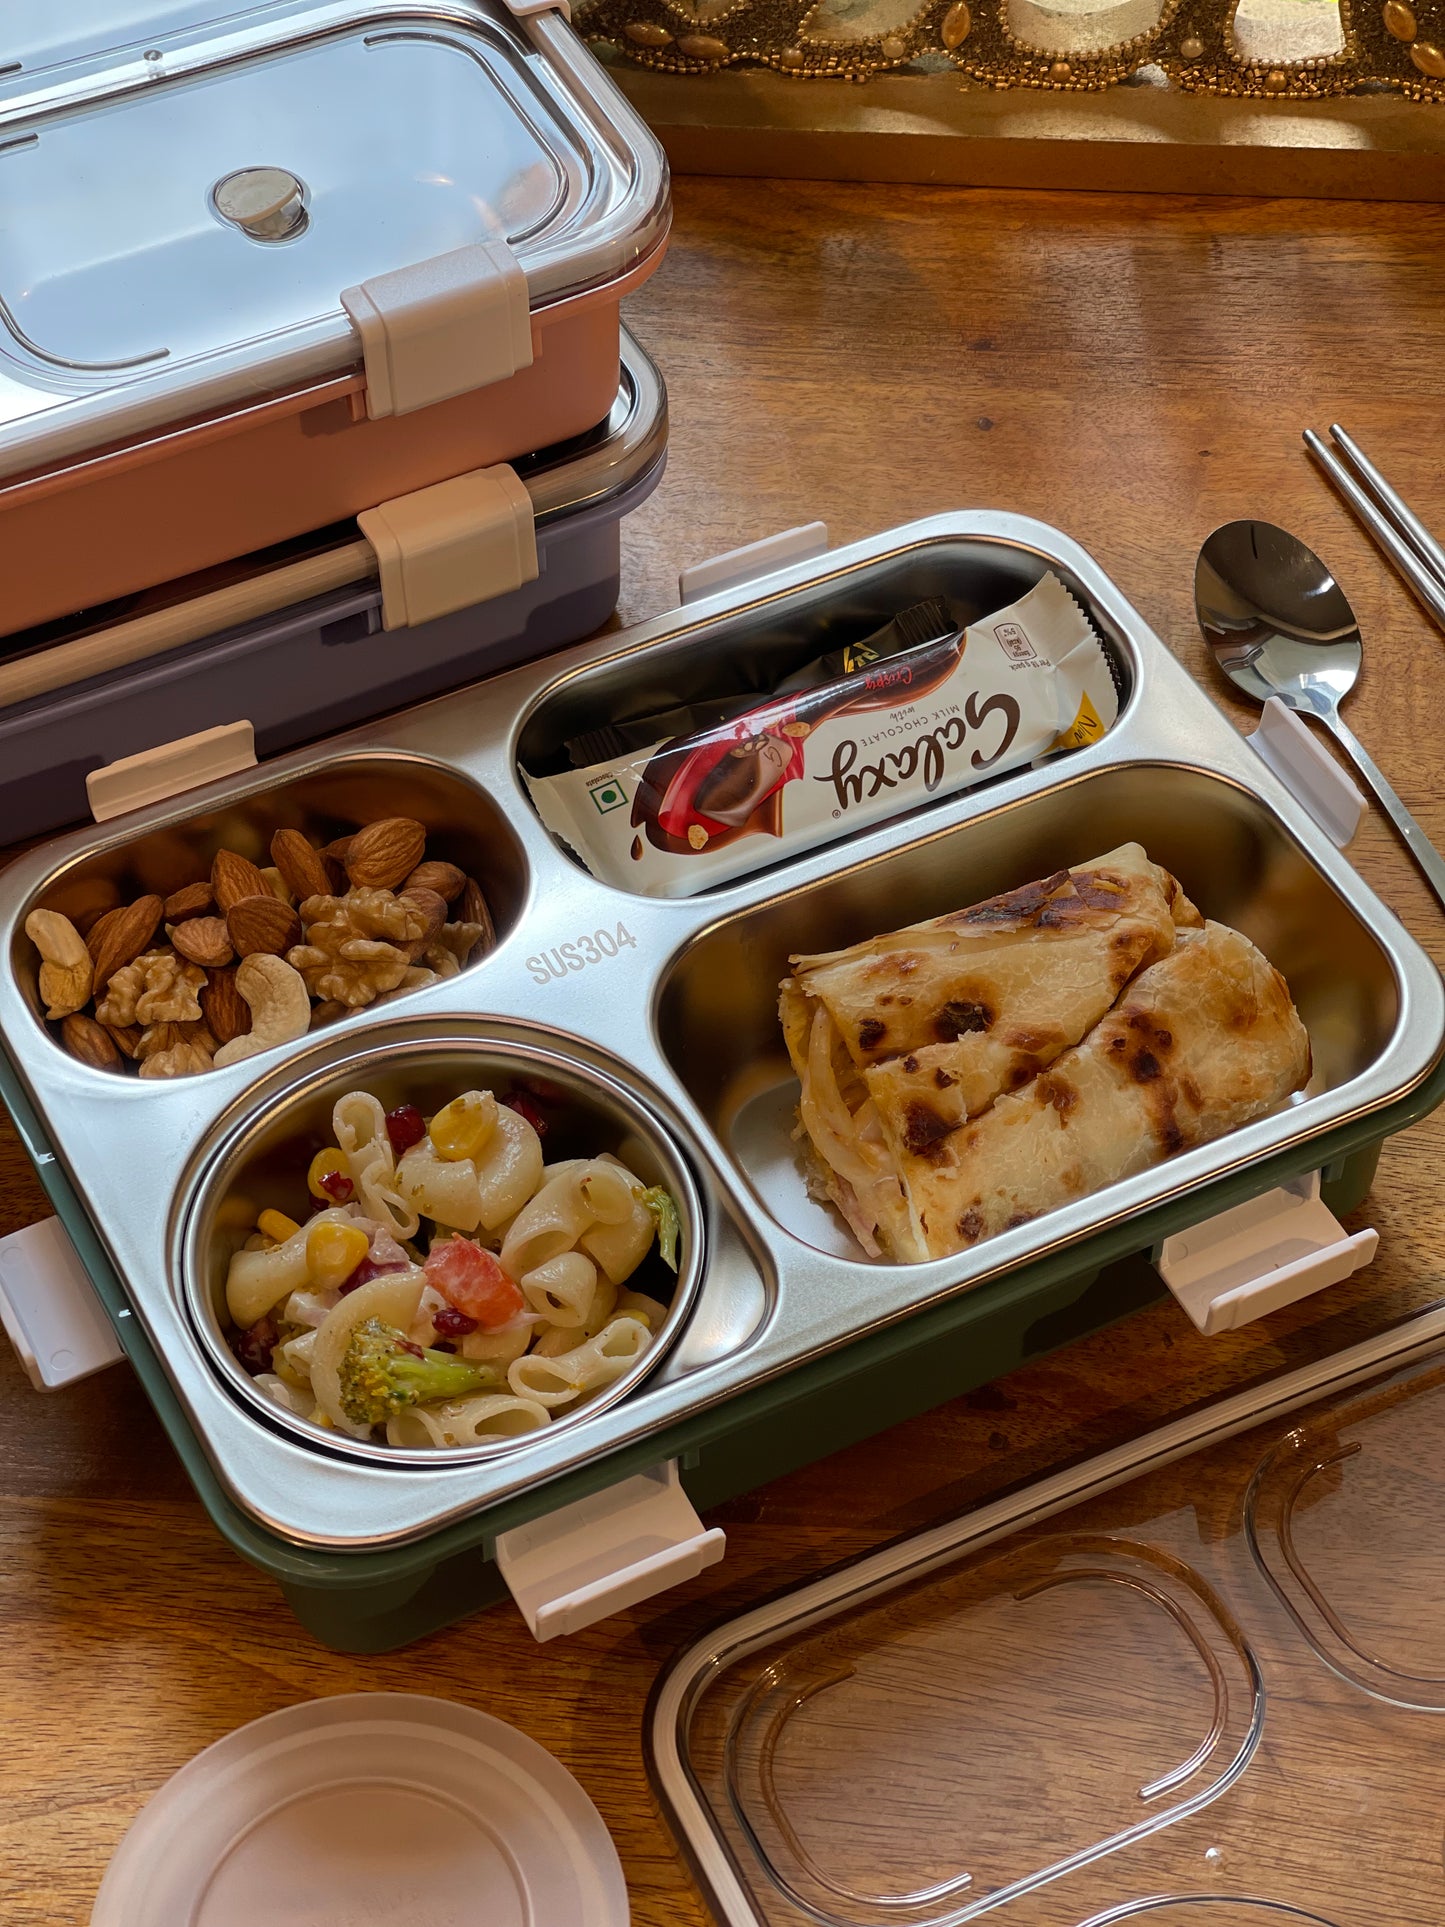 Meal Station Stainless Steel lunch box